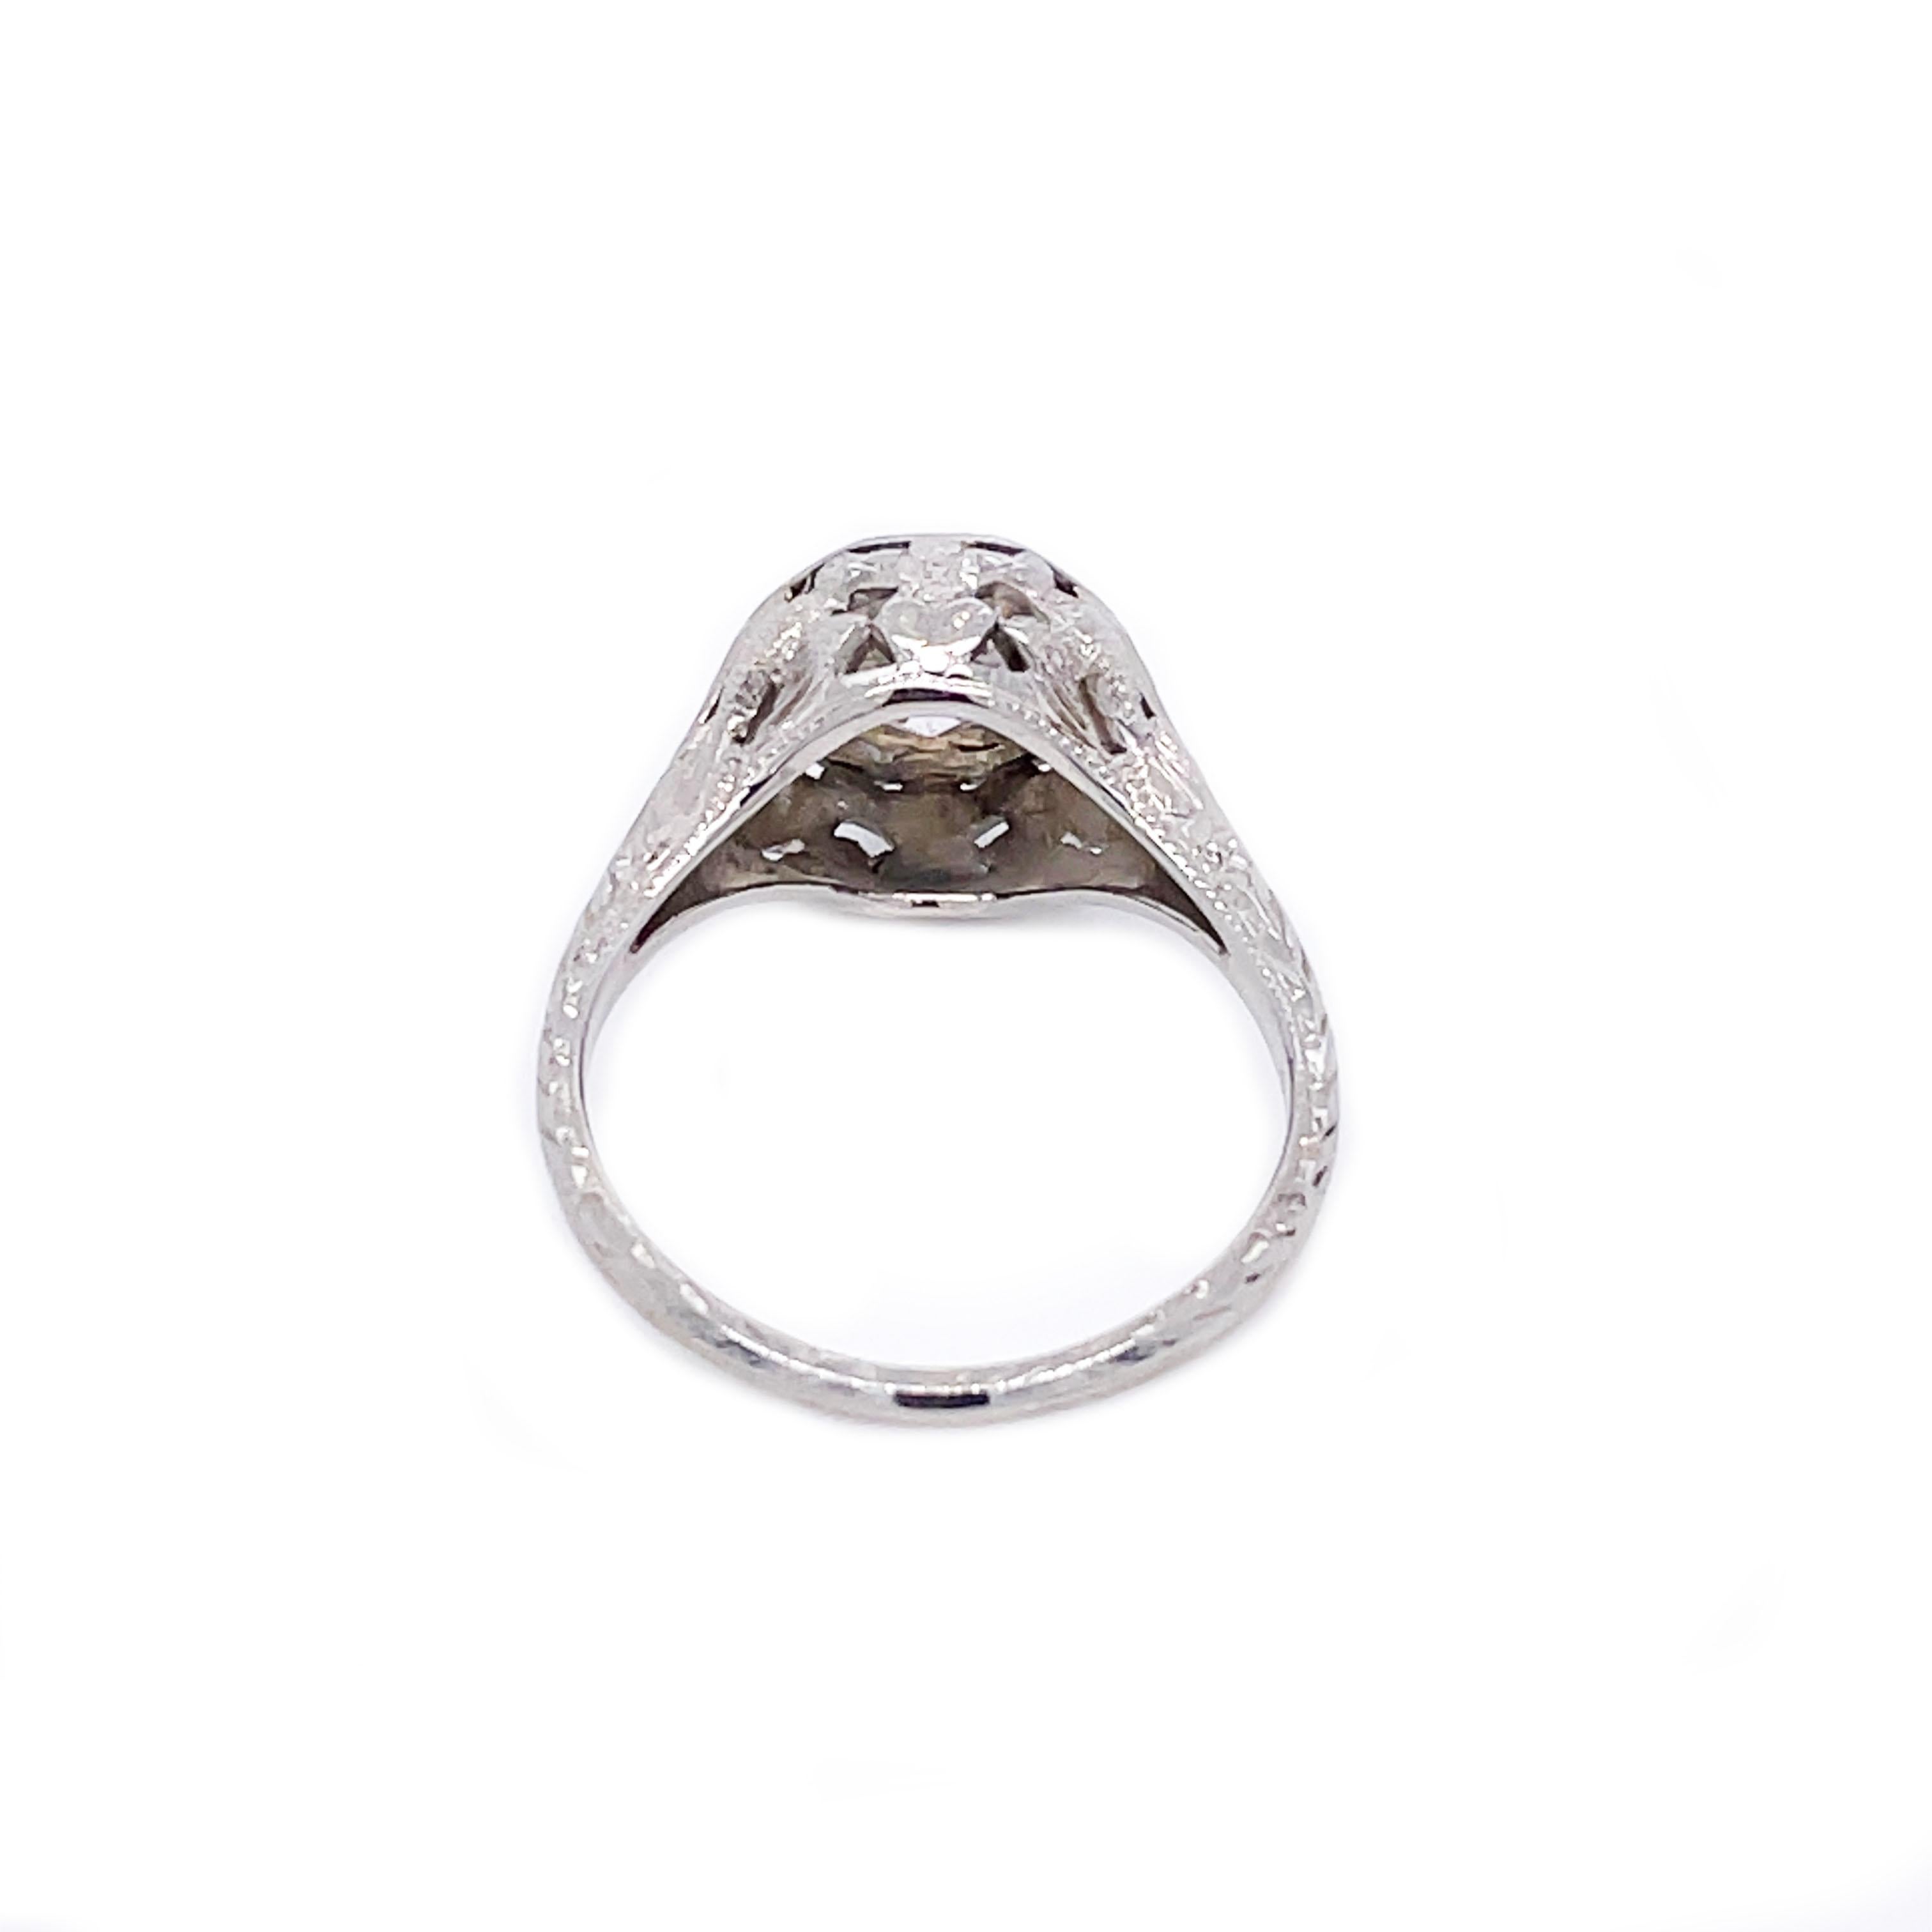 1920s 18K White Gold Filigree Diamond Love Bird Ring with GIA Report For Sale 2